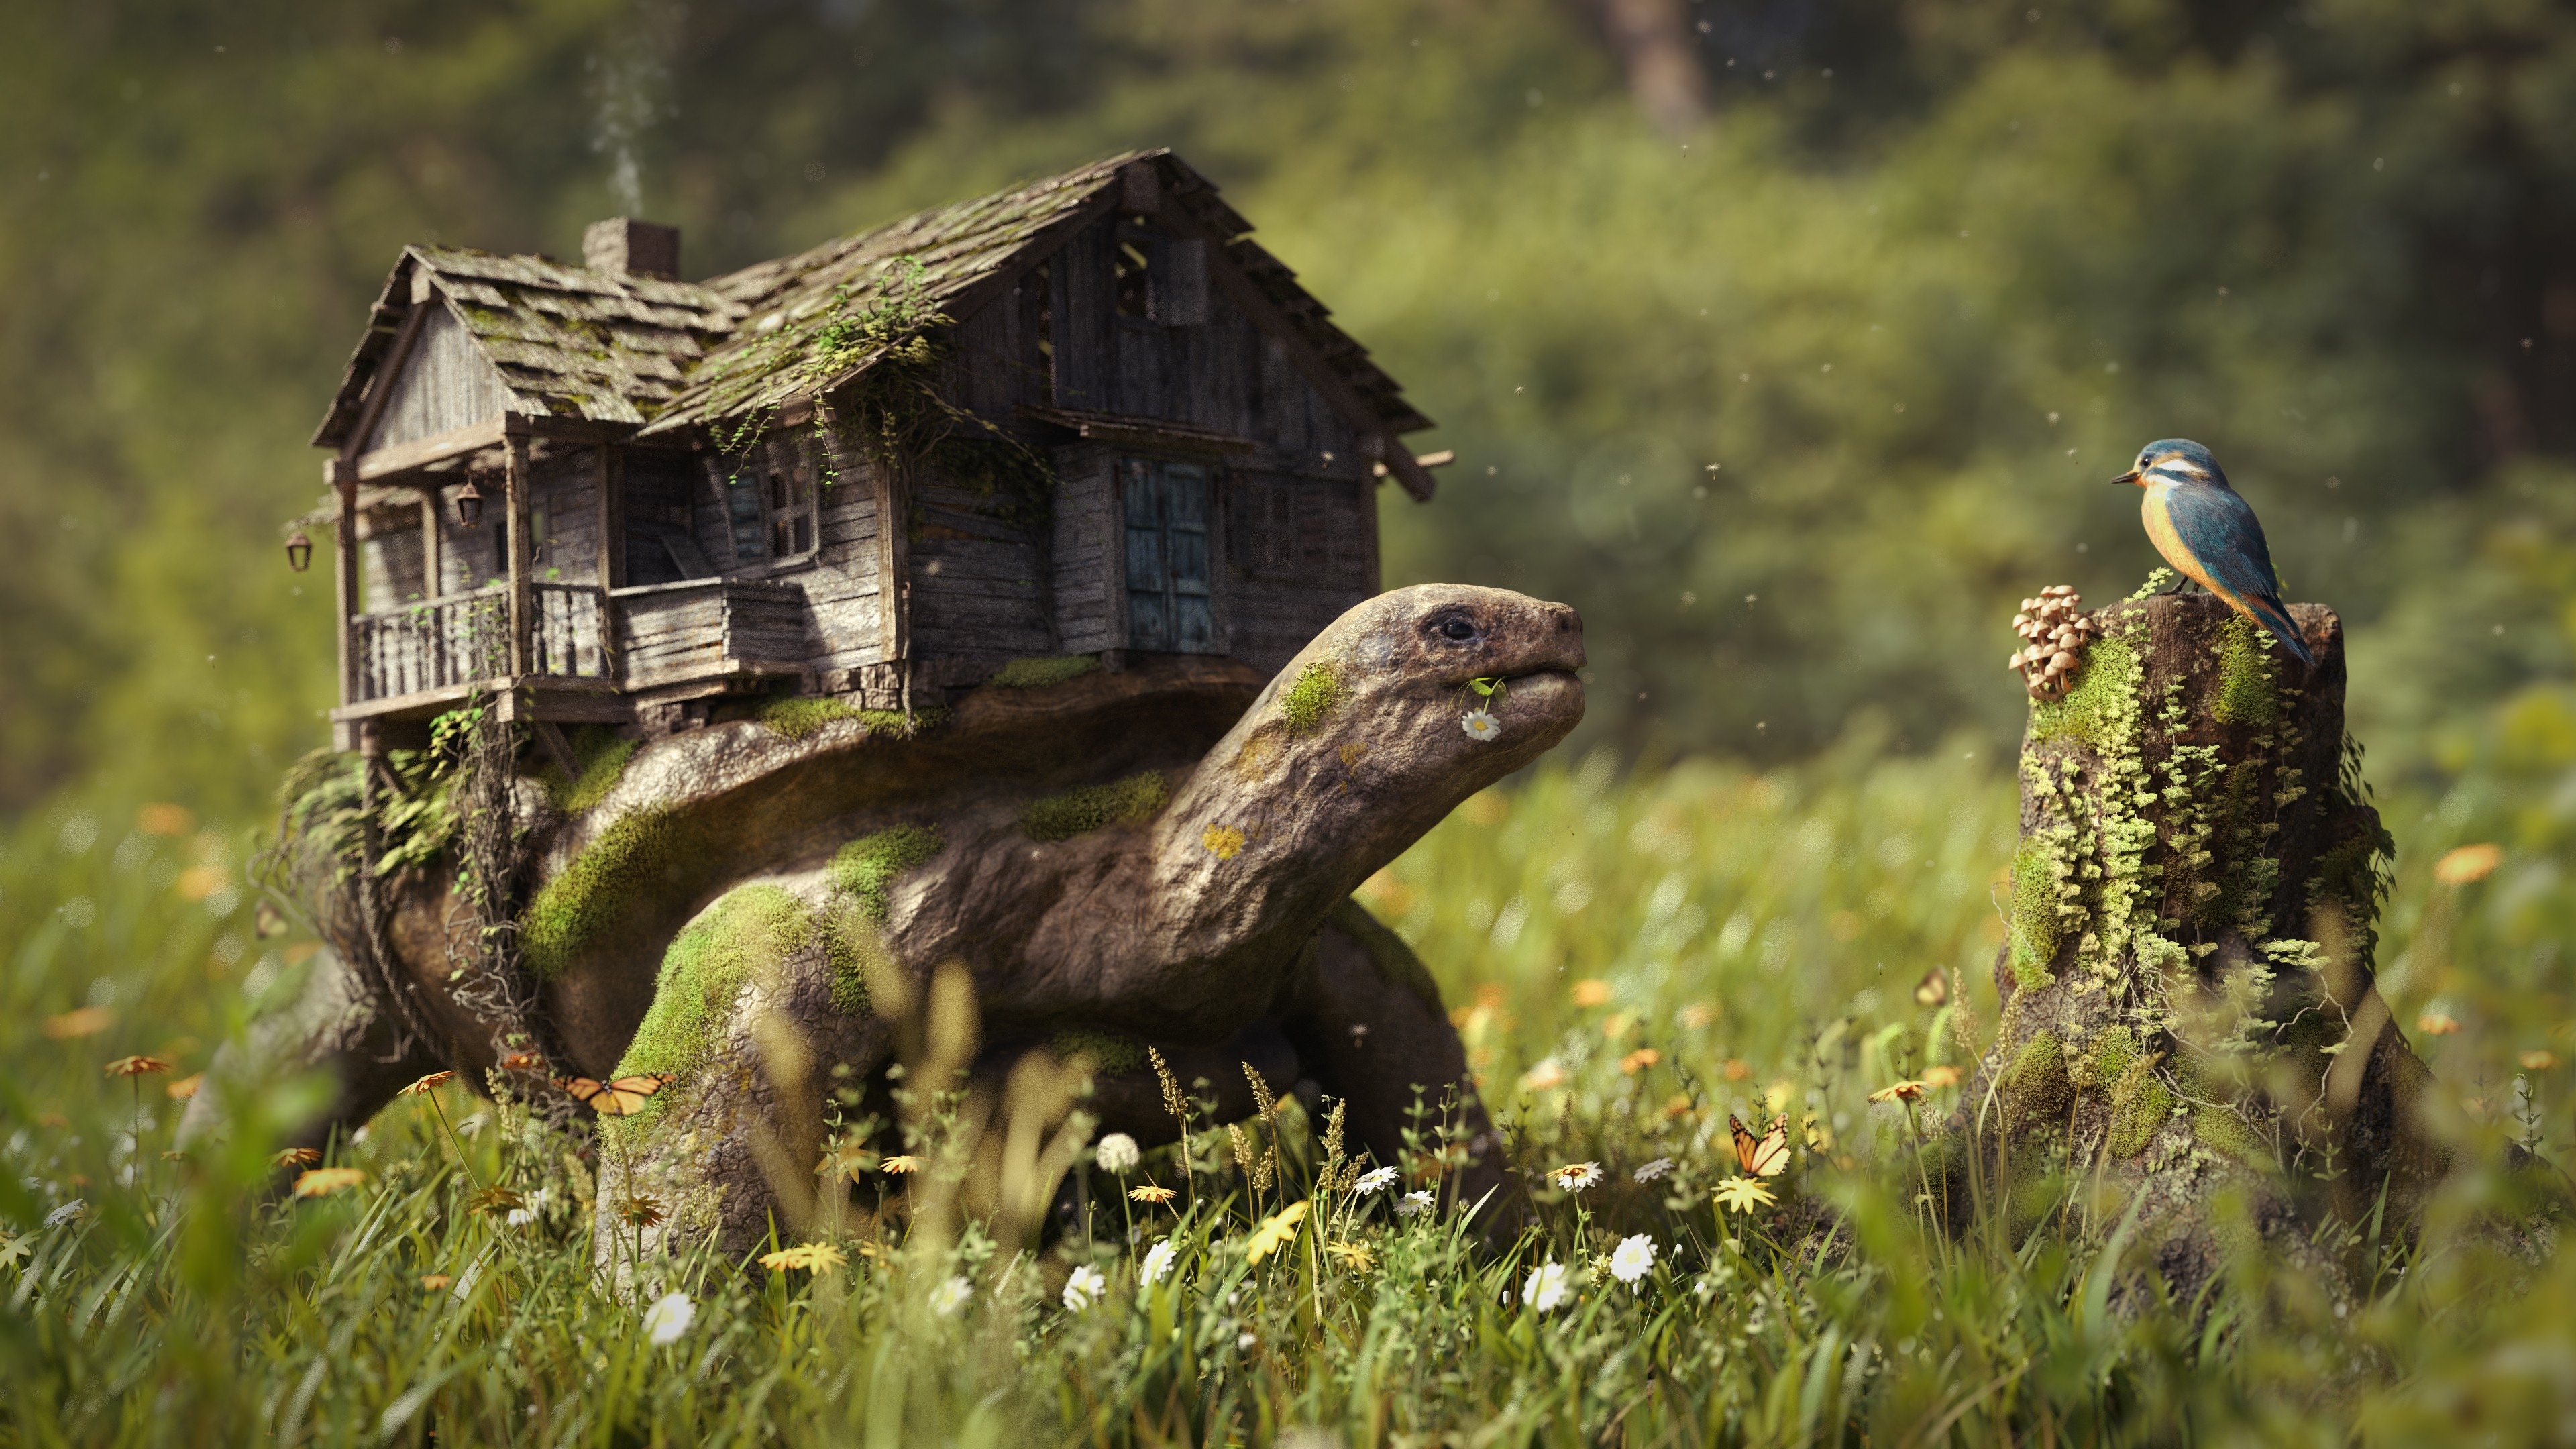 A fabulous turtle with a house on its back looks at a tit